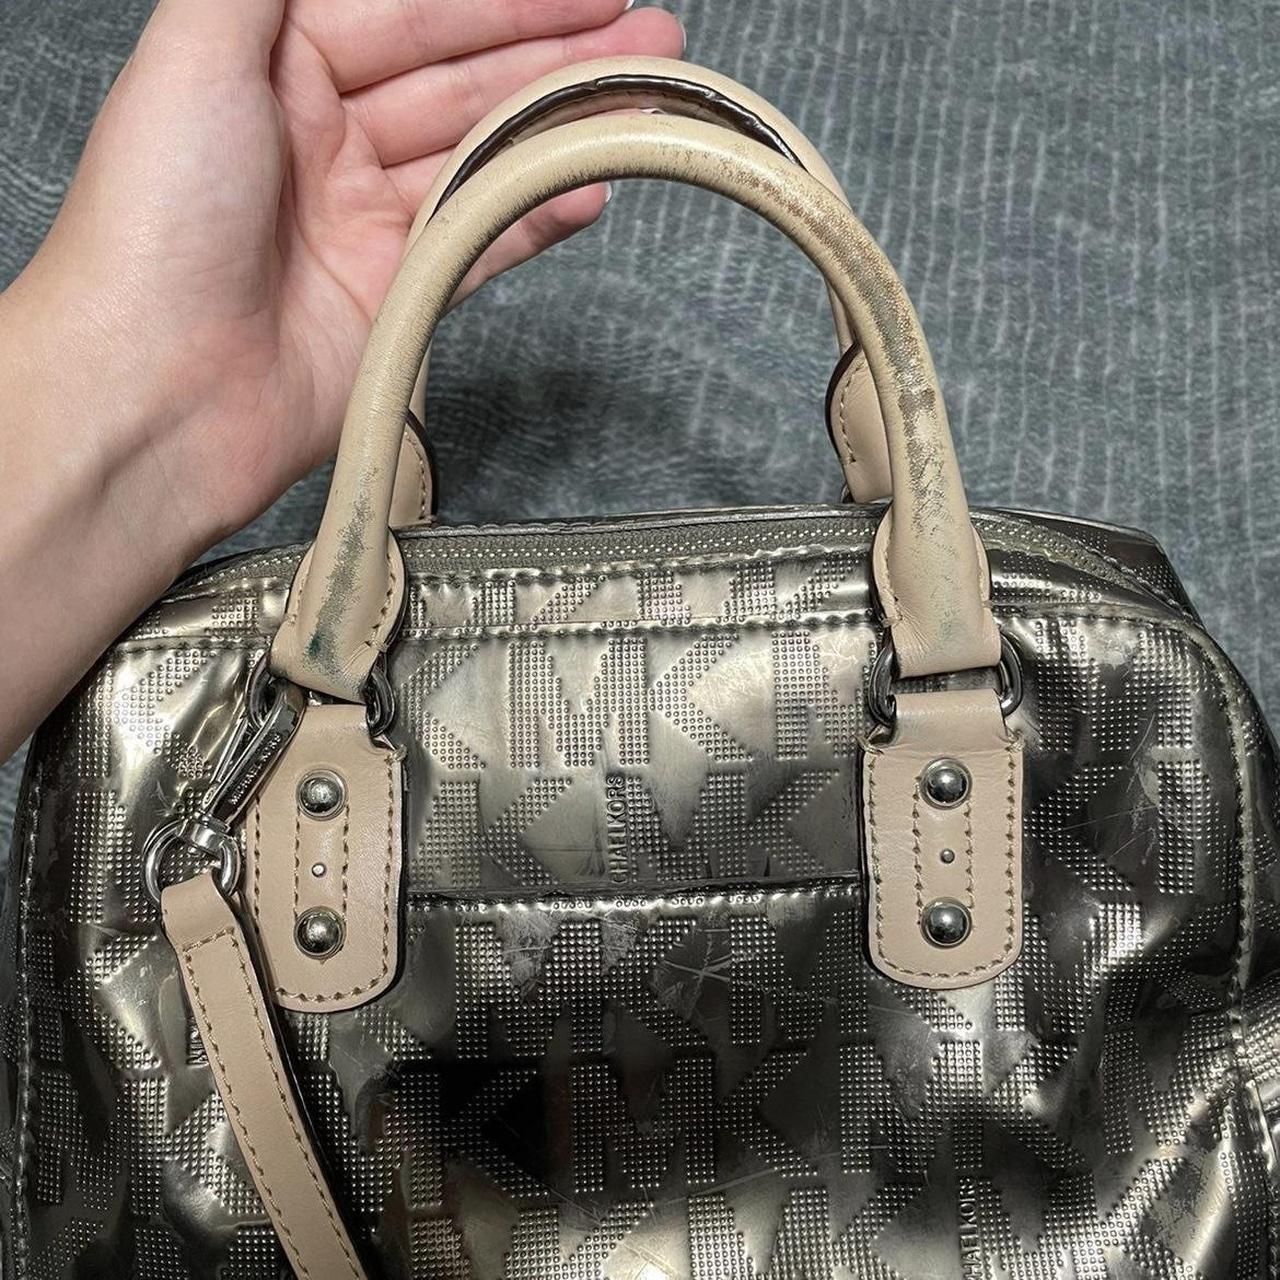 Michael Kors | Bags | New Mk Grey And Silver Purse With Bag I Got It For  Gift But Never Carried It | Poshmark